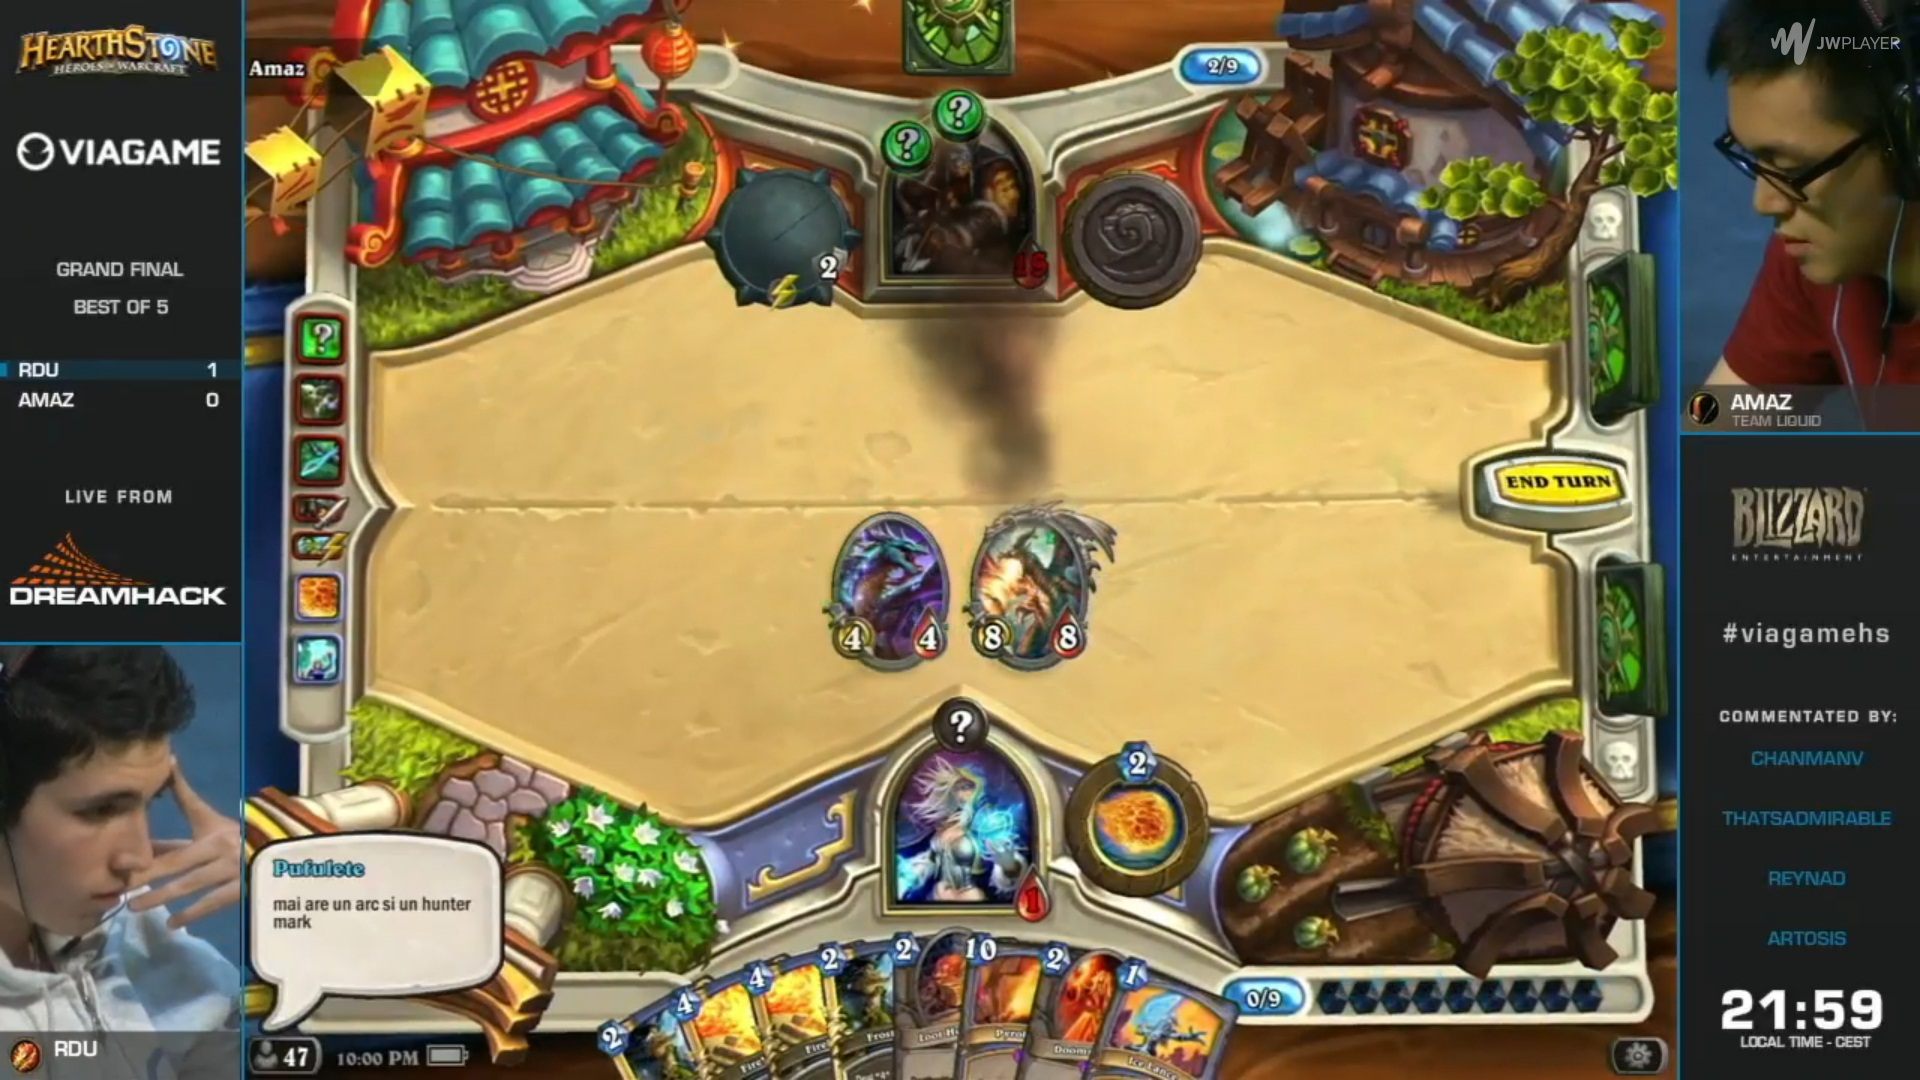 Why are we ok with this Hearthstone winner saying ‘retard’?